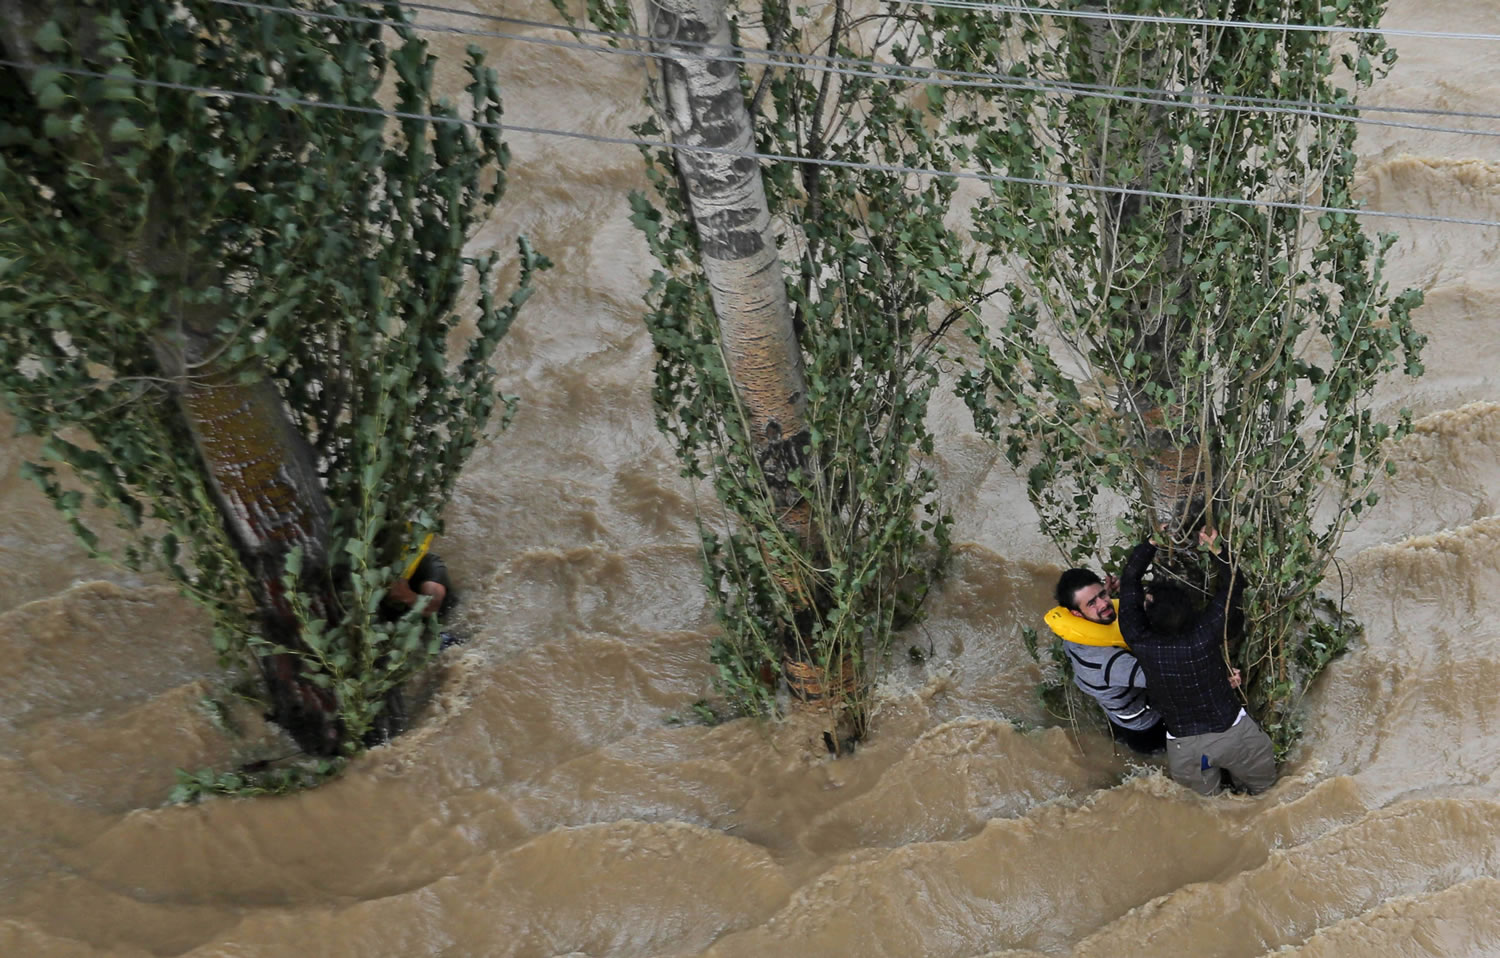 Kashmiris hang on to a tree to prevent being swept away by floodwaters in Srinagar, India, Tuesday, Sept. 9, 2014. The death toll from floods in Pakistan and India reached 400 on Tuesday and have put more than half a million people in peril and rendered thousands homeless in the two neighboring states.